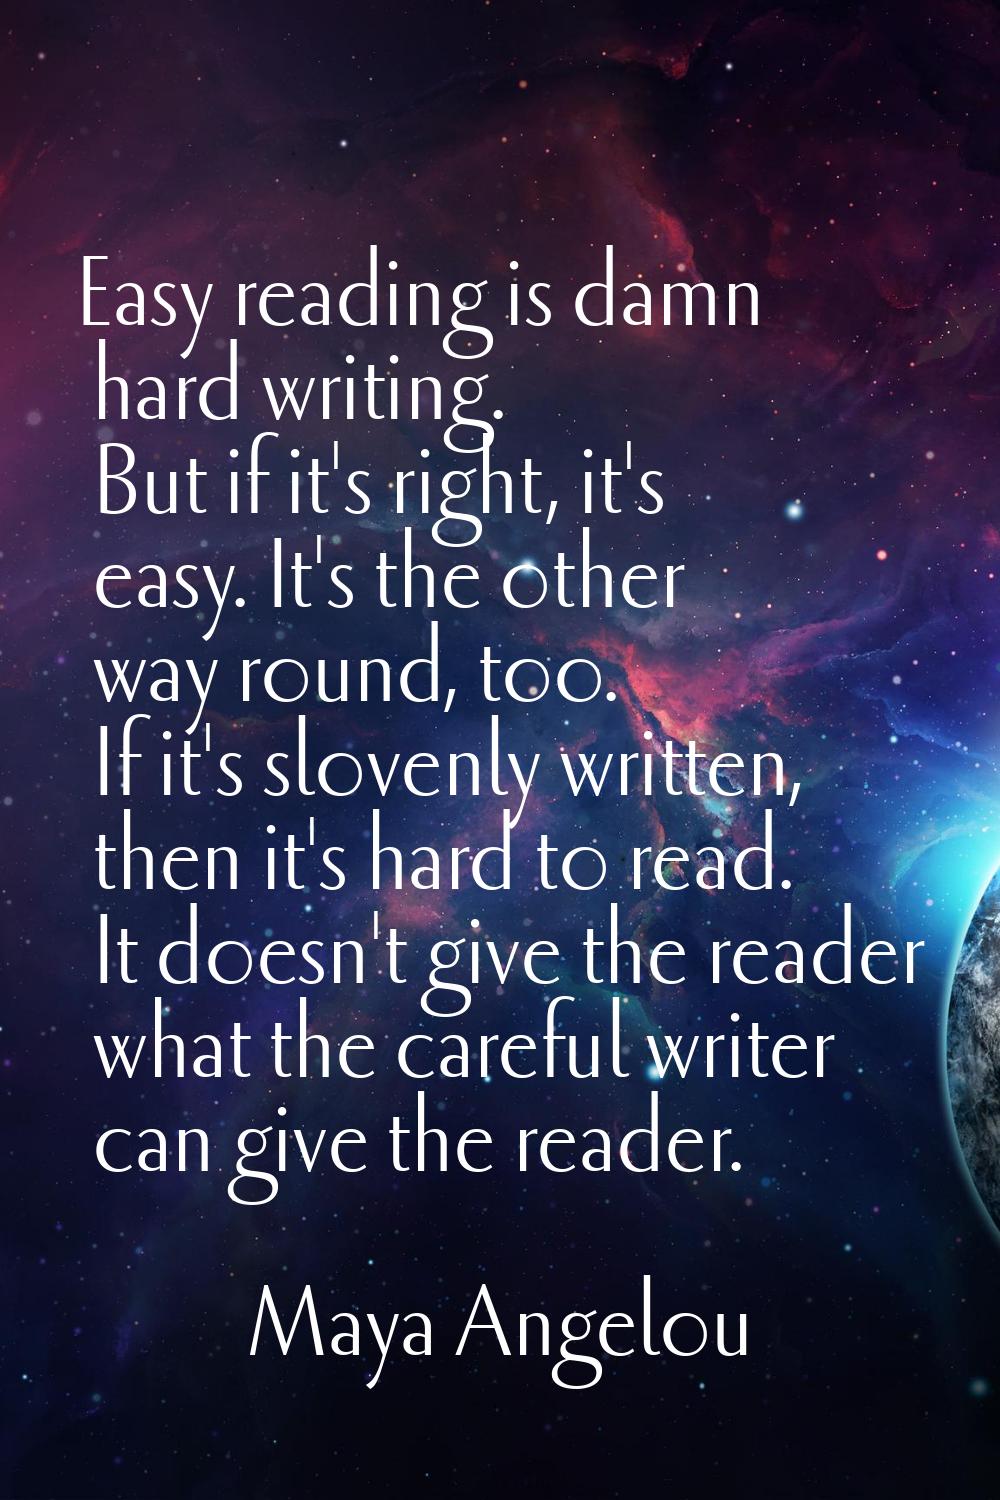 Easy reading is damn hard writing. But if it's right, it's easy. It's the other way round, too. If 